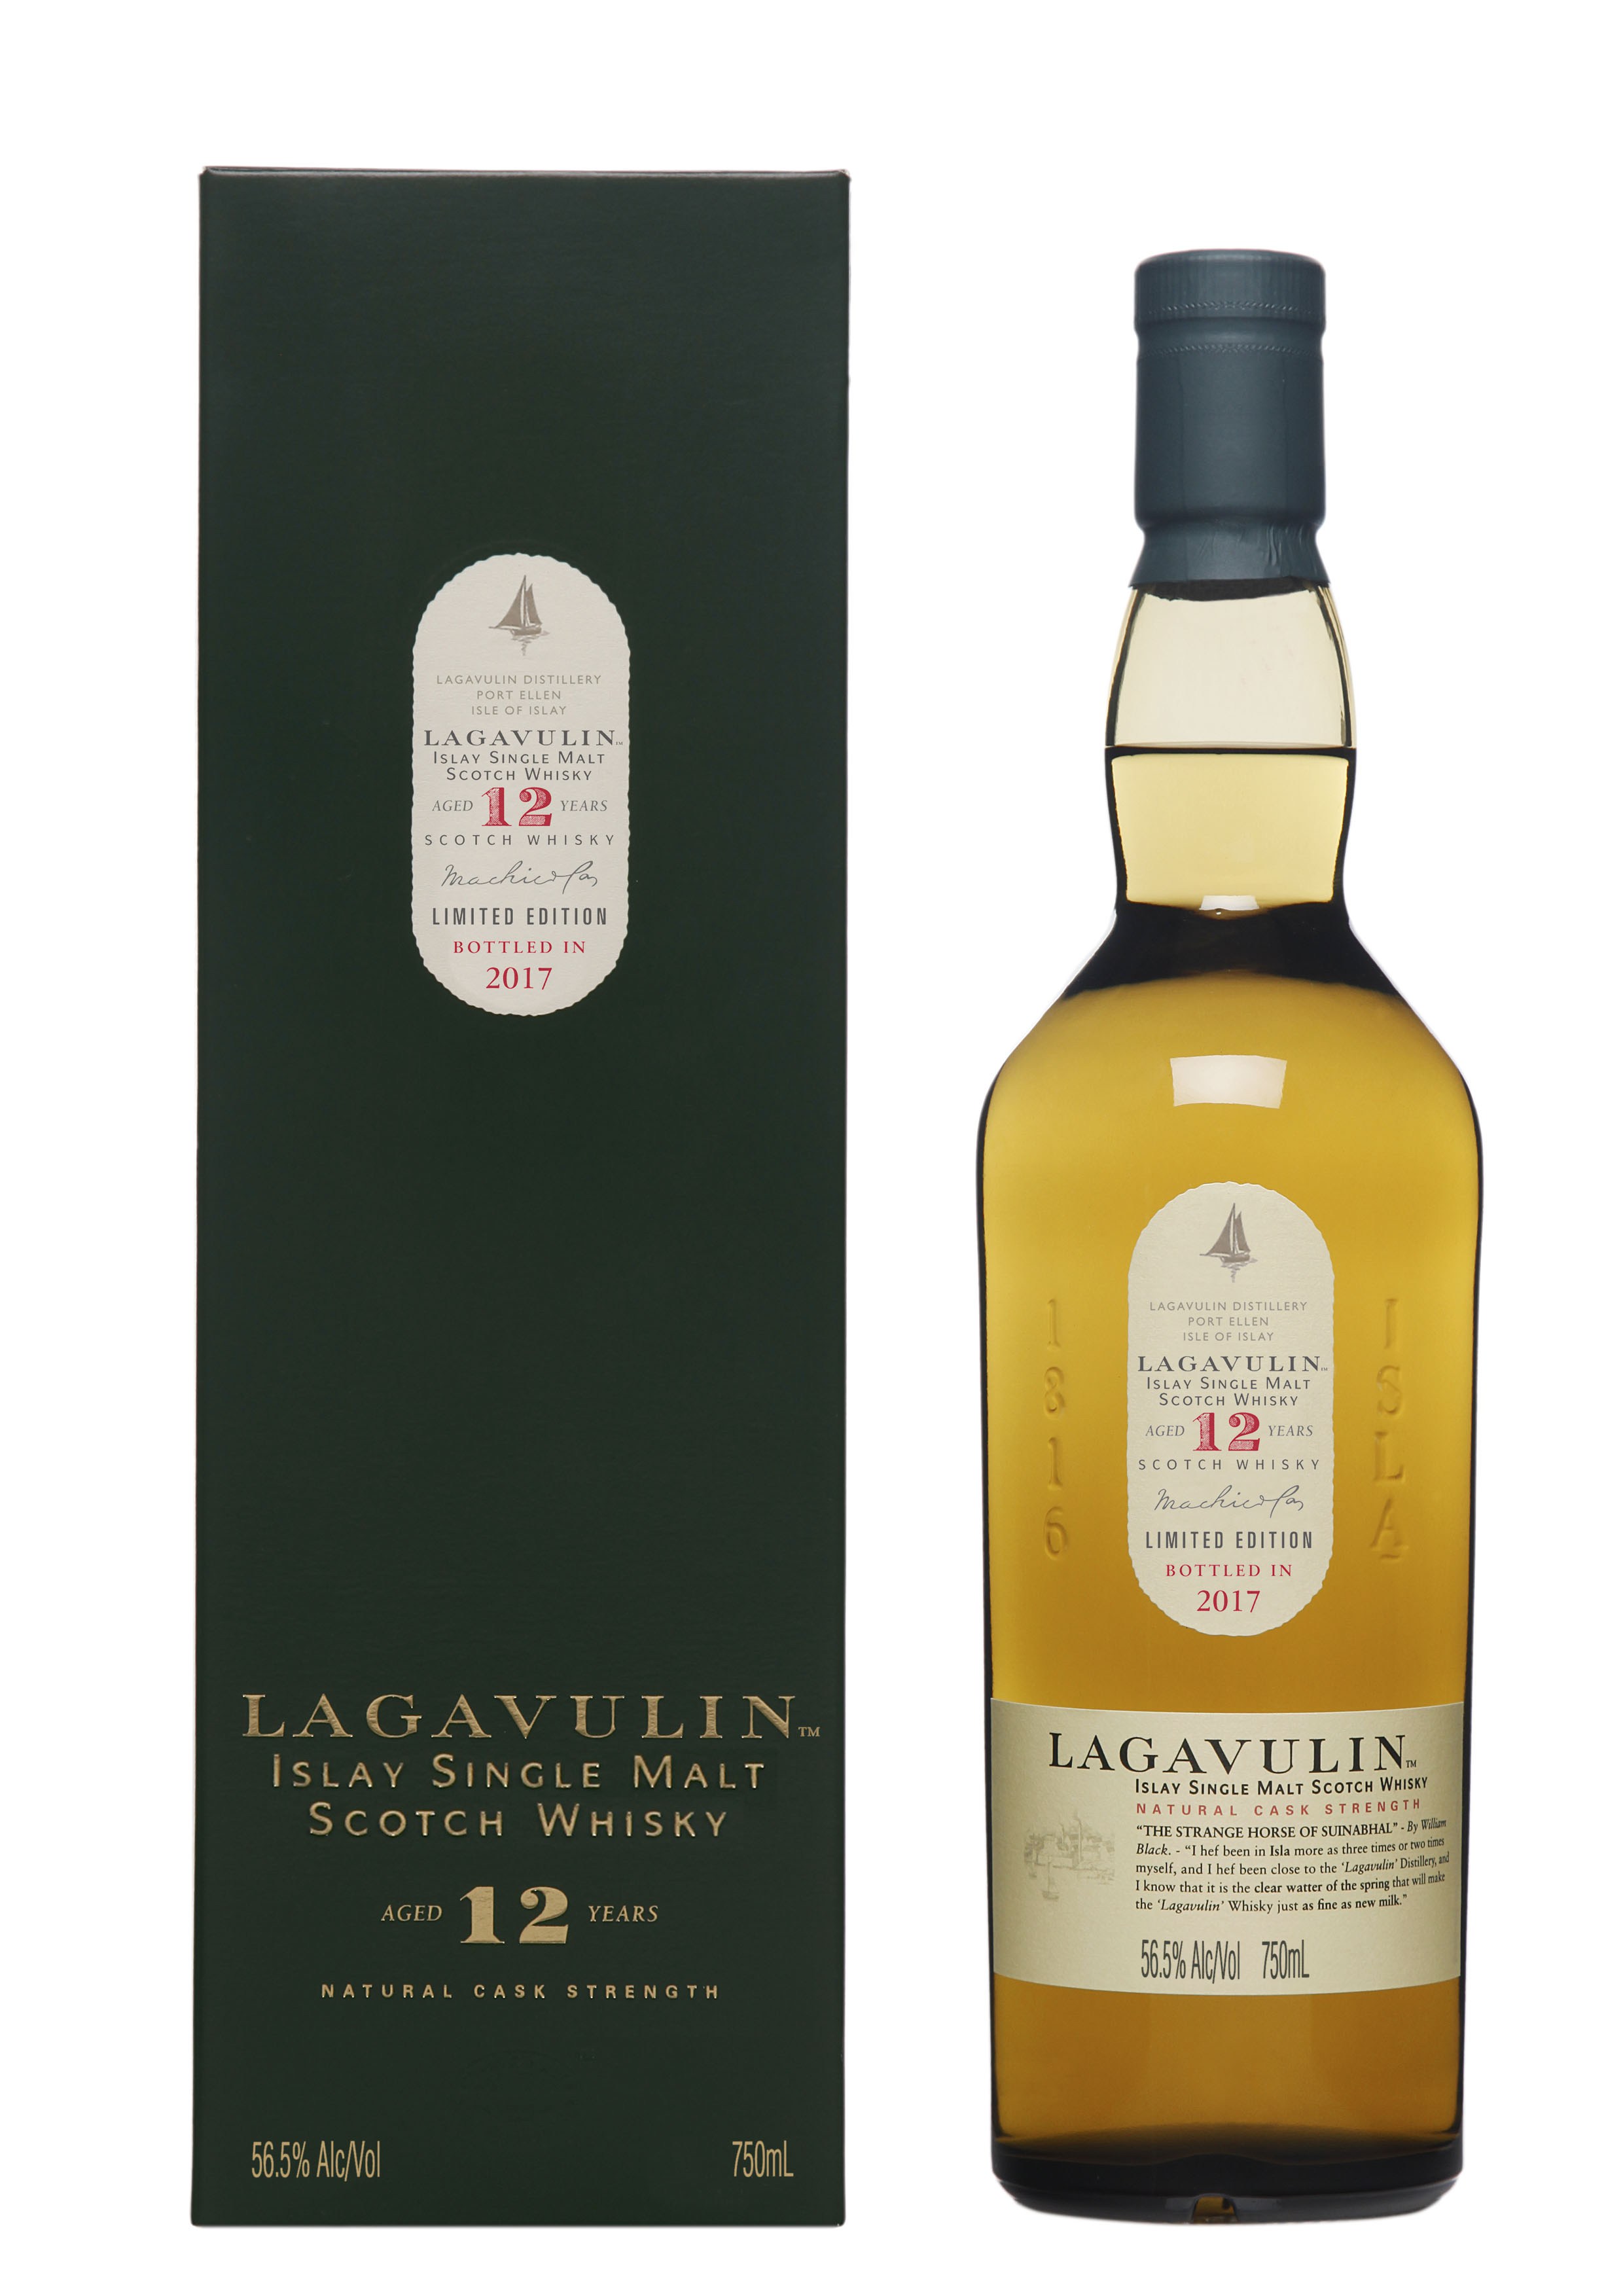 Lagavulin 12 Year Old Diageo Special Release 2018 Whisky - 70cl 57.8%